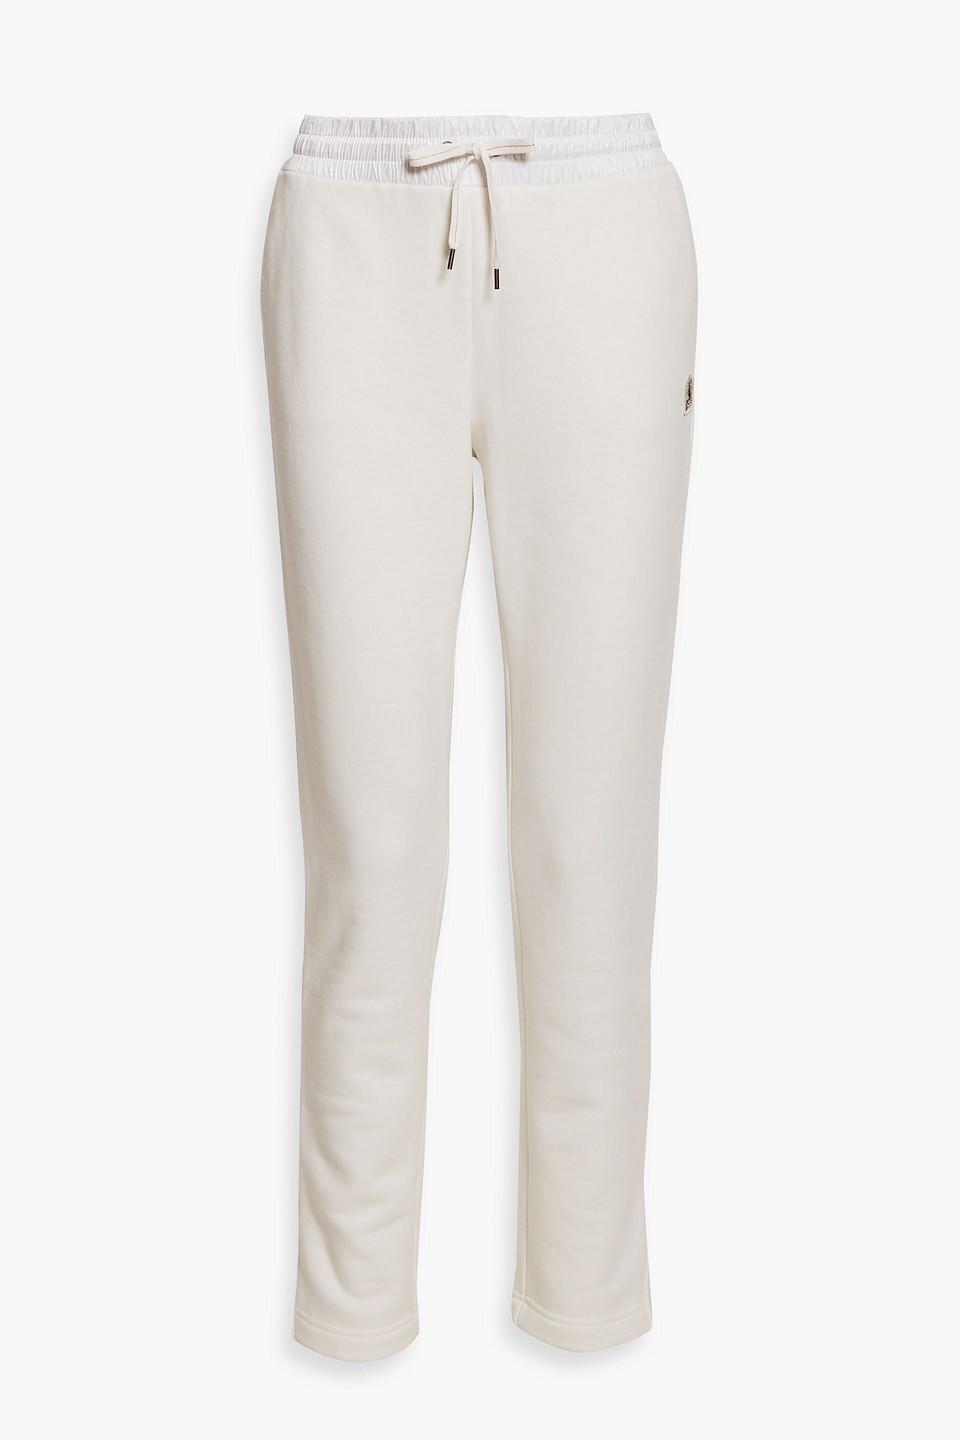 Parajumpers Cotton-blend Fleece Track Pants in White | Lyst